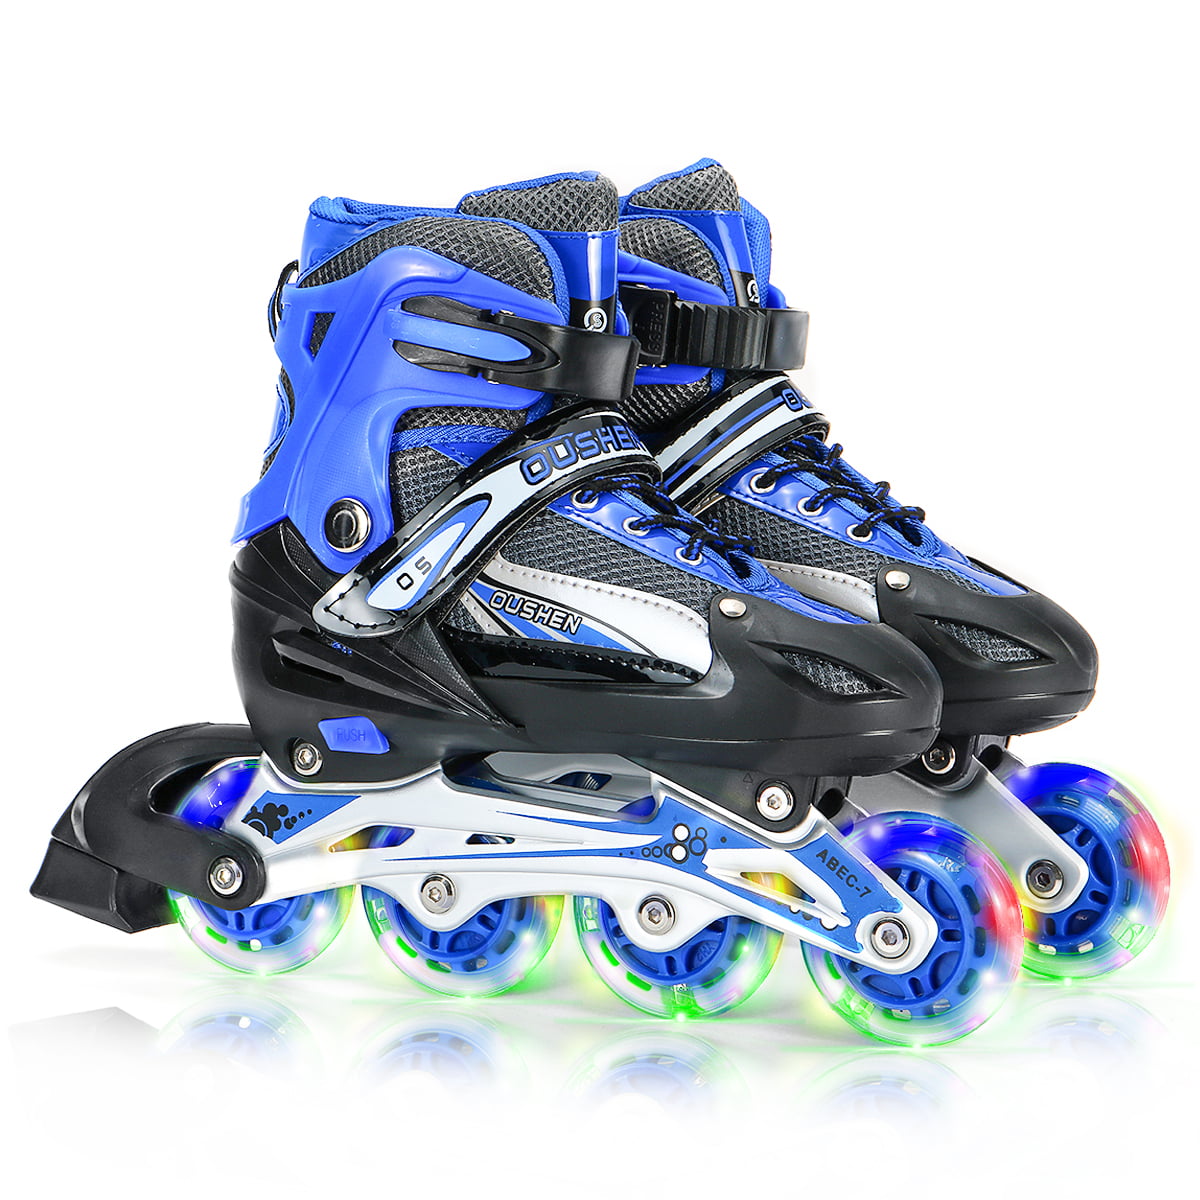 Adjustable Inline Skates for Kids and Adults with Illuminating Wheels Light Up Roller Skates for Boys Girls and Beginners 